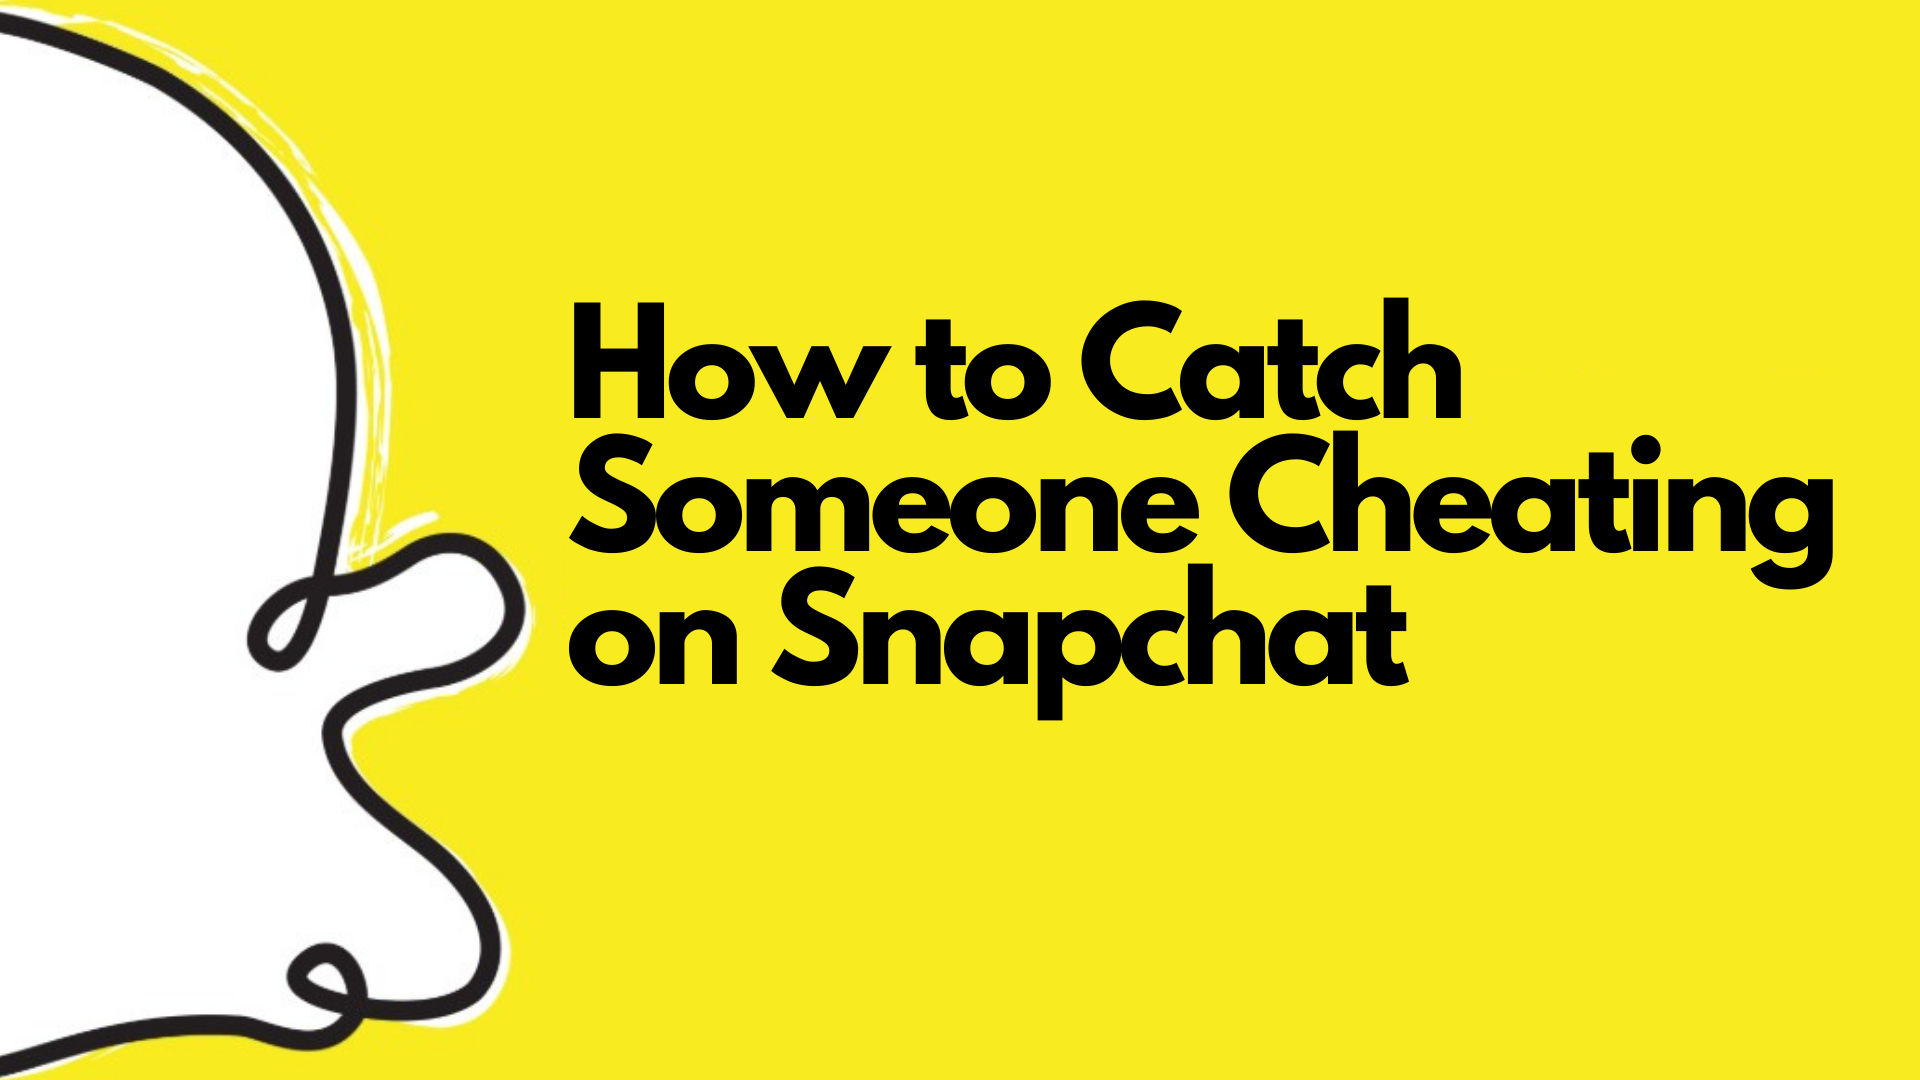 How to Catch Someone Cheating on Snapchat